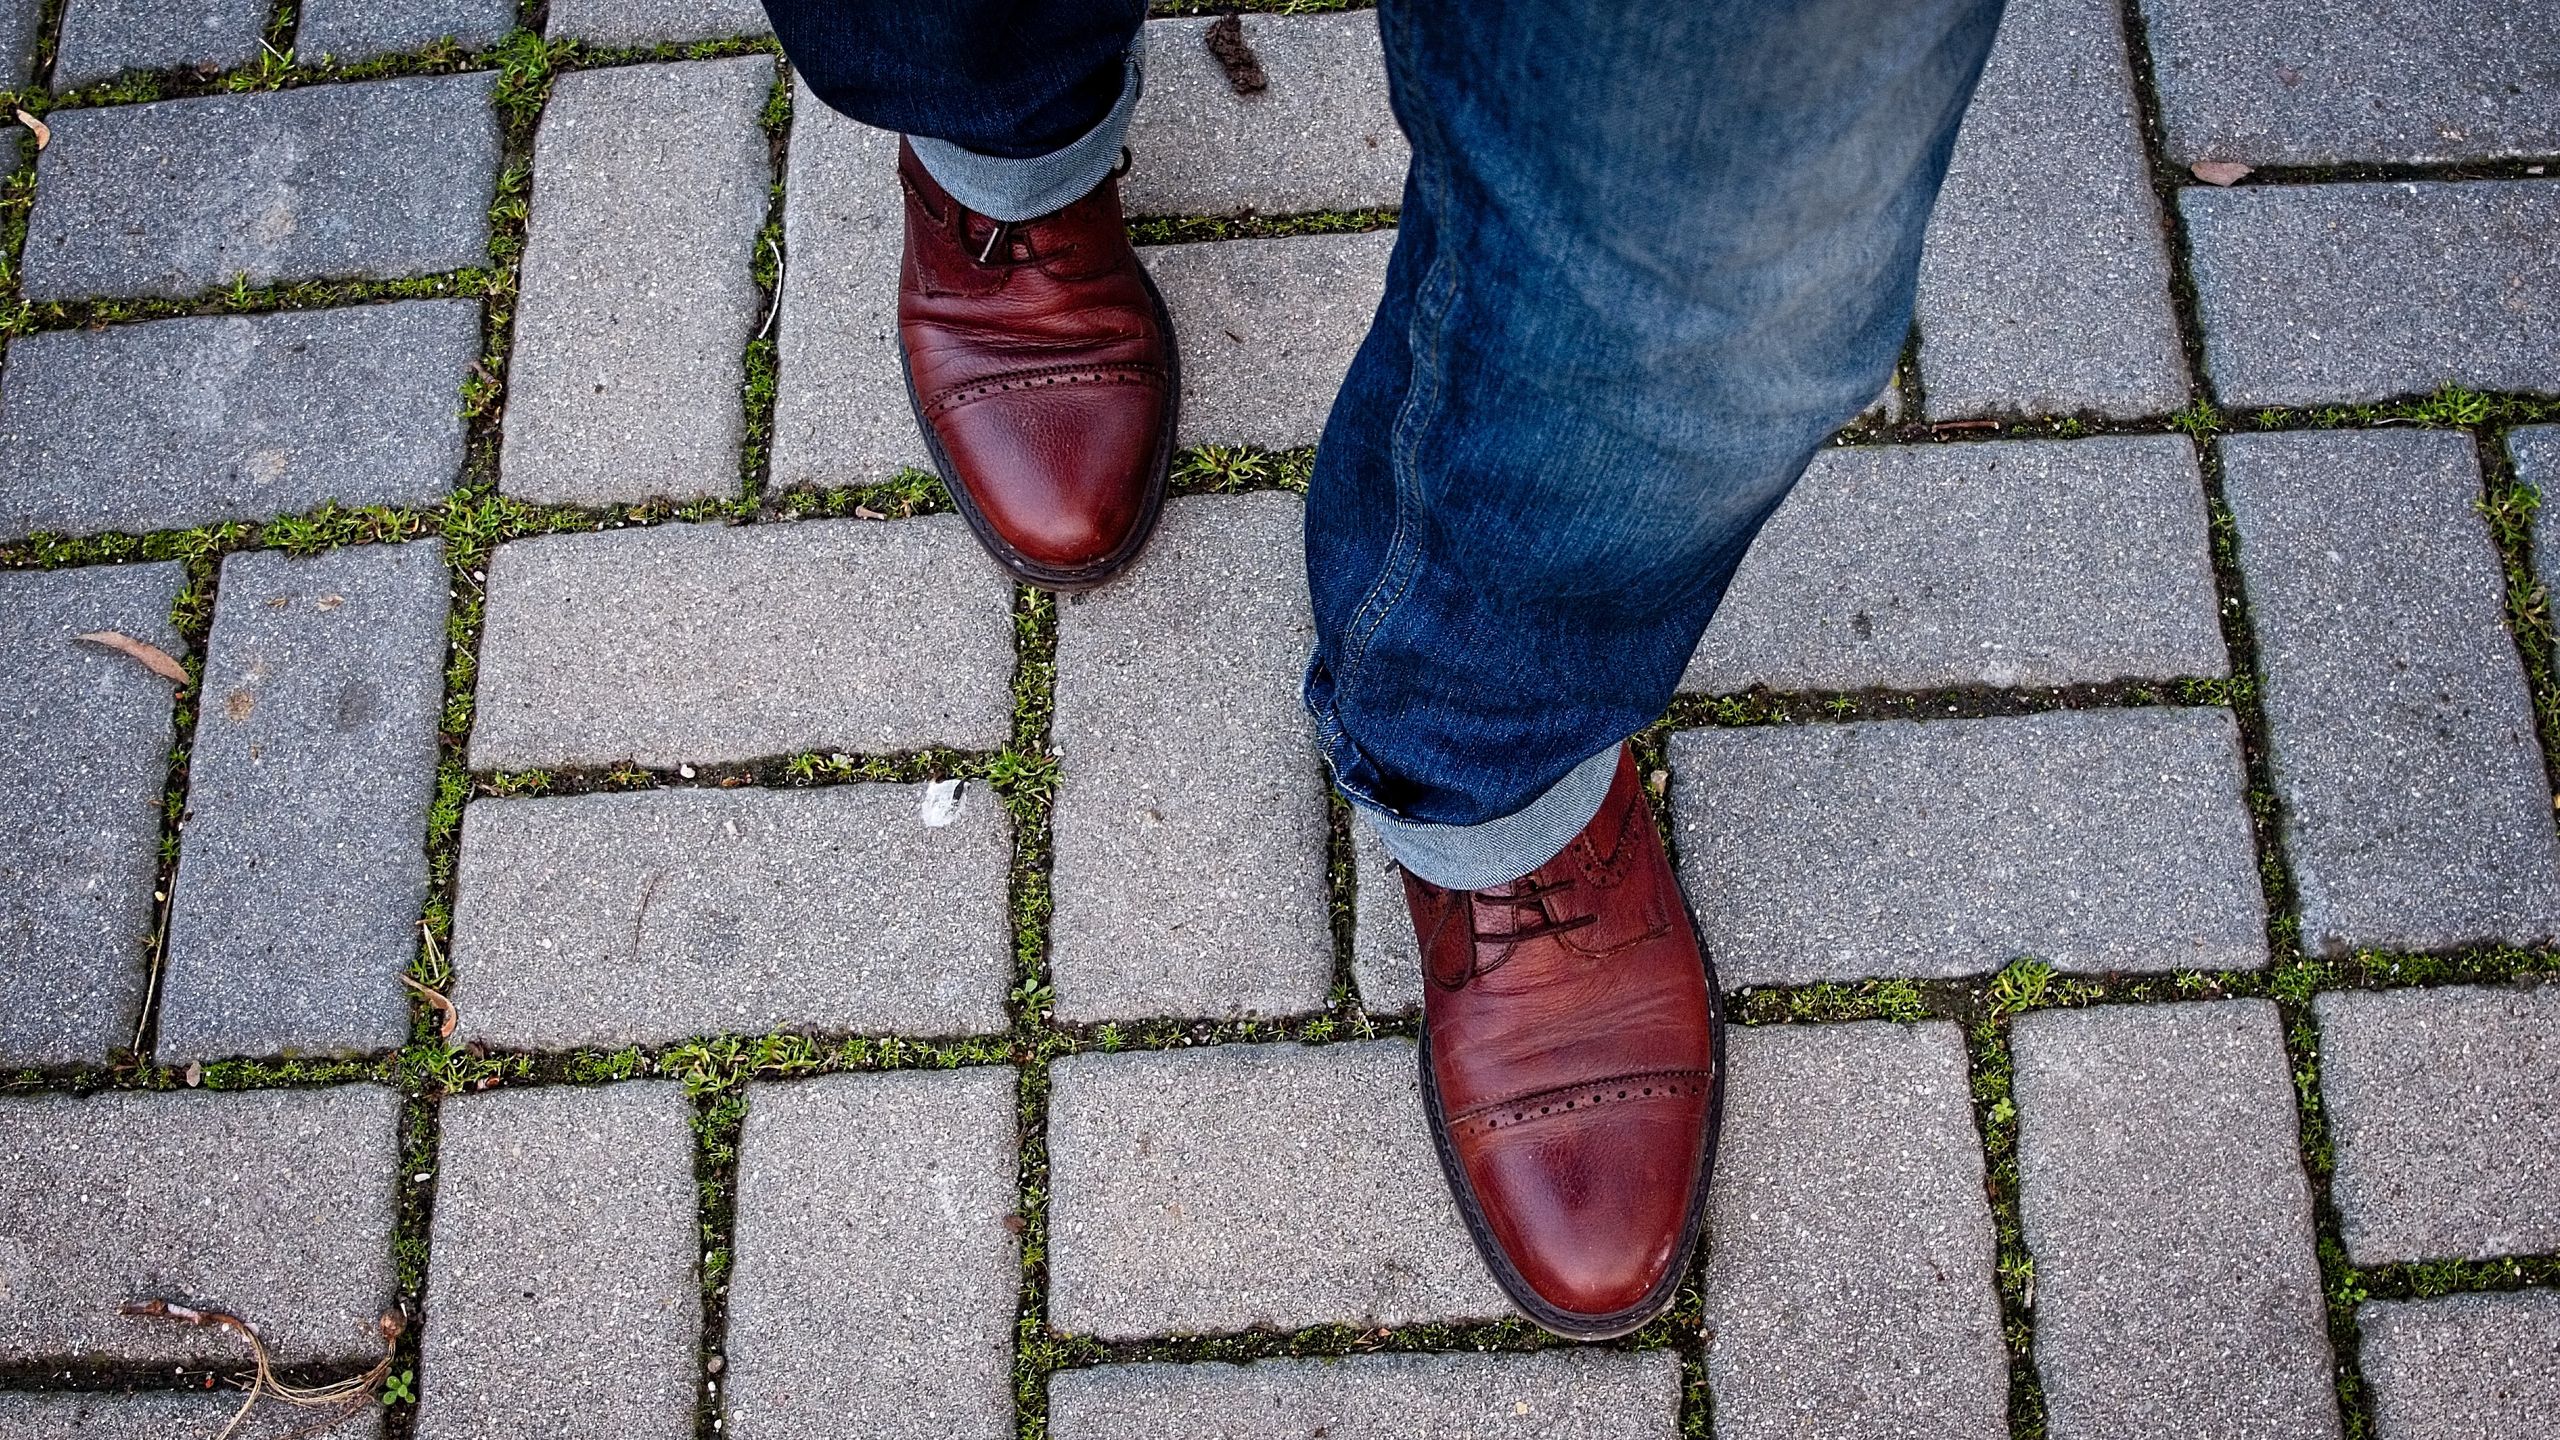 a person wearing a pair of brown shoes standing on a brick sidewalk​​​​‌﻿‍﻿​‍​‍‌‍﻿﻿‌﻿​‍‌‍‍‌‌‍‌﻿‌‍‍‌‌‍﻿‍​‍​‍​﻿‍‍​‍​‍‌﻿​﻿‌‍​‌‌‍﻿‍‌‍‍‌‌﻿‌​‌﻿‍‌​‍﻿‍‌‍‍‌‌‍﻿﻿​‍​‍​‍﻿​​‍​‍‌‍‍​‌﻿​‍‌‍‌‌‌‍‌‍​‍​‍​﻿‍‍​‍​‍‌‍‍​‌﻿‌​‌﻿‌​‌﻿​​​﻿‍‍​‍﻿﻿​‍﻿﻿‌‍﻿​‌‍﻿﻿‌‍​﻿‌‍​‌‌‍﻿​‌‍‍​‌‍﻿﻿‌﻿​﻿‌﻿‌​​﻿‍‍​﻿​﻿​﻿​﻿​﻿​﻿​﻿​﻿​‍﻿﻿‌‍‍‌‌‍﻿‍‌﻿‌​‌‍‌‌‌‍﻿‍‌﻿‌​​‍﻿﻿‌‍‌‌‌‍‌​‌‍‍‌‌﻿‌​​‍﻿﻿‌‍﻿‌‌‍﻿﻿‌‍‌​‌‍‌‌​﻿﻿‌‌﻿​​‌﻿​‍‌‍‌‌‌﻿​﻿‌‍‌‌‌‍﻿‍‌﻿‌​‌‍​‌‌﻿‌​‌‍‍‌‌‍﻿﻿‌‍﻿‍​﻿‍﻿‌‍‍‌‌‍‌​​﻿﻿‌​﻿‌﻿‌‍​‍​﻿‌‌‌‍​‍‌‍‌‍‌‍‌​​﻿‌‍‌‍‌‌​‍﻿‌‌‍‌‌​﻿‌​​﻿​​​﻿​‍​‍﻿‌​﻿‌​​﻿​‍​﻿‍‌​﻿‌﻿​‍﻿‌‌‍​‍​﻿‍​‌‍​‌‌‍​﻿​‍﻿‌​﻿​﻿​﻿‌​‌‍​‍​﻿‌‌​﻿​​​﻿‌​​﻿​‌​﻿‌‍‌‍‌​​﻿‍​‌‍‌​‌‍​﻿​﻿‍﻿‌﻿‌​‌﻿‍‌‌﻿​​‌‍‌‌​﻿﻿‌‌﻿​﻿‌‍‍​‌‍﻿﻿‌‍‌‌​﻿‍﻿‌﻿​​‌‍​‌‌﻿‌​‌‍‍​​﻿﻿‌‌‍﻿‌‌‍‌‌‌‍‌​‌‍‍‌‌‍​‌​‍‌‌​﻿‌‌‌​​‍‌‌﻿﻿‌‍‍﻿‌‍‌‌‌﻿‍‌​‍‌‌​﻿​﻿‌​‌​​‍‌‌​﻿​﻿‌​‌​​‍‌‌​﻿​‍​﻿​‍​﻿‌﻿​﻿‌‌‌‍‌‌​﻿‌​​﻿‌‍​﻿​​​﻿‍​​﻿​‍​﻿‌‍‌‍‌​​﻿​‍‌‍​‍​‍‌‌​﻿​‍​﻿​‍​‍‌‌​﻿‌‌‌​‌​​‍﻿‍‌‍​‌‌‍﻿​‌﻿‌​​﻿﻿﻿‌‍​‍‌‍​‌‌﻿​﻿‌‍‌‌‌‌‌‌‌﻿​‍‌‍﻿​​﻿﻿‌‌‍‍​‌﻿‌​‌﻿‌​‌﻿​​​‍‌‌​﻿​﻿‌​​‌​‍‌‌​﻿​‍‌​‌‍​‍‌‌​﻿​‍‌​‌‍‌‍﻿​‌‍﻿﻿‌‍​﻿‌‍​‌‌‍﻿​‌‍‍​‌‍﻿﻿‌﻿​﻿‌﻿‌​​‍‌‌​﻿​﻿‌​​‌​﻿​﻿​﻿​﻿​﻿​﻿​﻿​﻿​‍‌‍‌‍‍‌‌‍‌​​﻿﻿‌​﻿‌﻿‌‍​‍​﻿‌‌‌‍​‍‌‍‌‍‌‍‌​​﻿‌‍‌‍‌‌​‍﻿‌‌‍‌‌​﻿‌​​﻿​​​﻿​‍​‍﻿‌​﻿‌​​﻿​‍​﻿‍‌​﻿‌﻿​‍﻿‌‌‍​‍​﻿‍​‌‍​‌‌‍​﻿​‍﻿‌​﻿​﻿​﻿‌​‌‍​‍​﻿‌‌​﻿​​​﻿‌​​﻿​‌​﻿‌‍‌‍‌​​﻿‍​‌‍‌​‌‍​﻿​‍‌‍‌﻿‌​‌﻿‍‌‌﻿​​‌‍‌‌​﻿﻿‌‌﻿​﻿‌‍‍​‌‍﻿﻿‌‍‌‌​‍‌‍‌﻿​​‌‍​‌‌﻿‌​‌‍‍​​﻿﻿‌‌‍﻿‌‌‍‌‌‌‍‌​‌‍‍‌‌‍​‌​‍‌‌​﻿‌‌‌​​‍‌‌﻿﻿‌‍‍﻿‌‍‌‌‌﻿‍‌​‍‌‌​﻿​﻿‌​‌​​‍‌‌​﻿​﻿‌​‌​​‍‌‌​﻿​‍​﻿​‍​﻿‌﻿​﻿‌‌‌‍‌‌​﻿‌​​﻿‌‍​﻿​​​﻿‍​​﻿​‍​﻿‌‍‌‍‌​​﻿​‍‌‍​‍​‍‌‌​﻿​‍​﻿​‍​‍‌‌​﻿‌‌‌​‌​​‍﻿‍‌‍​‌‌‍﻿​‌﻿‌​​‍​‍‌﻿﻿‌